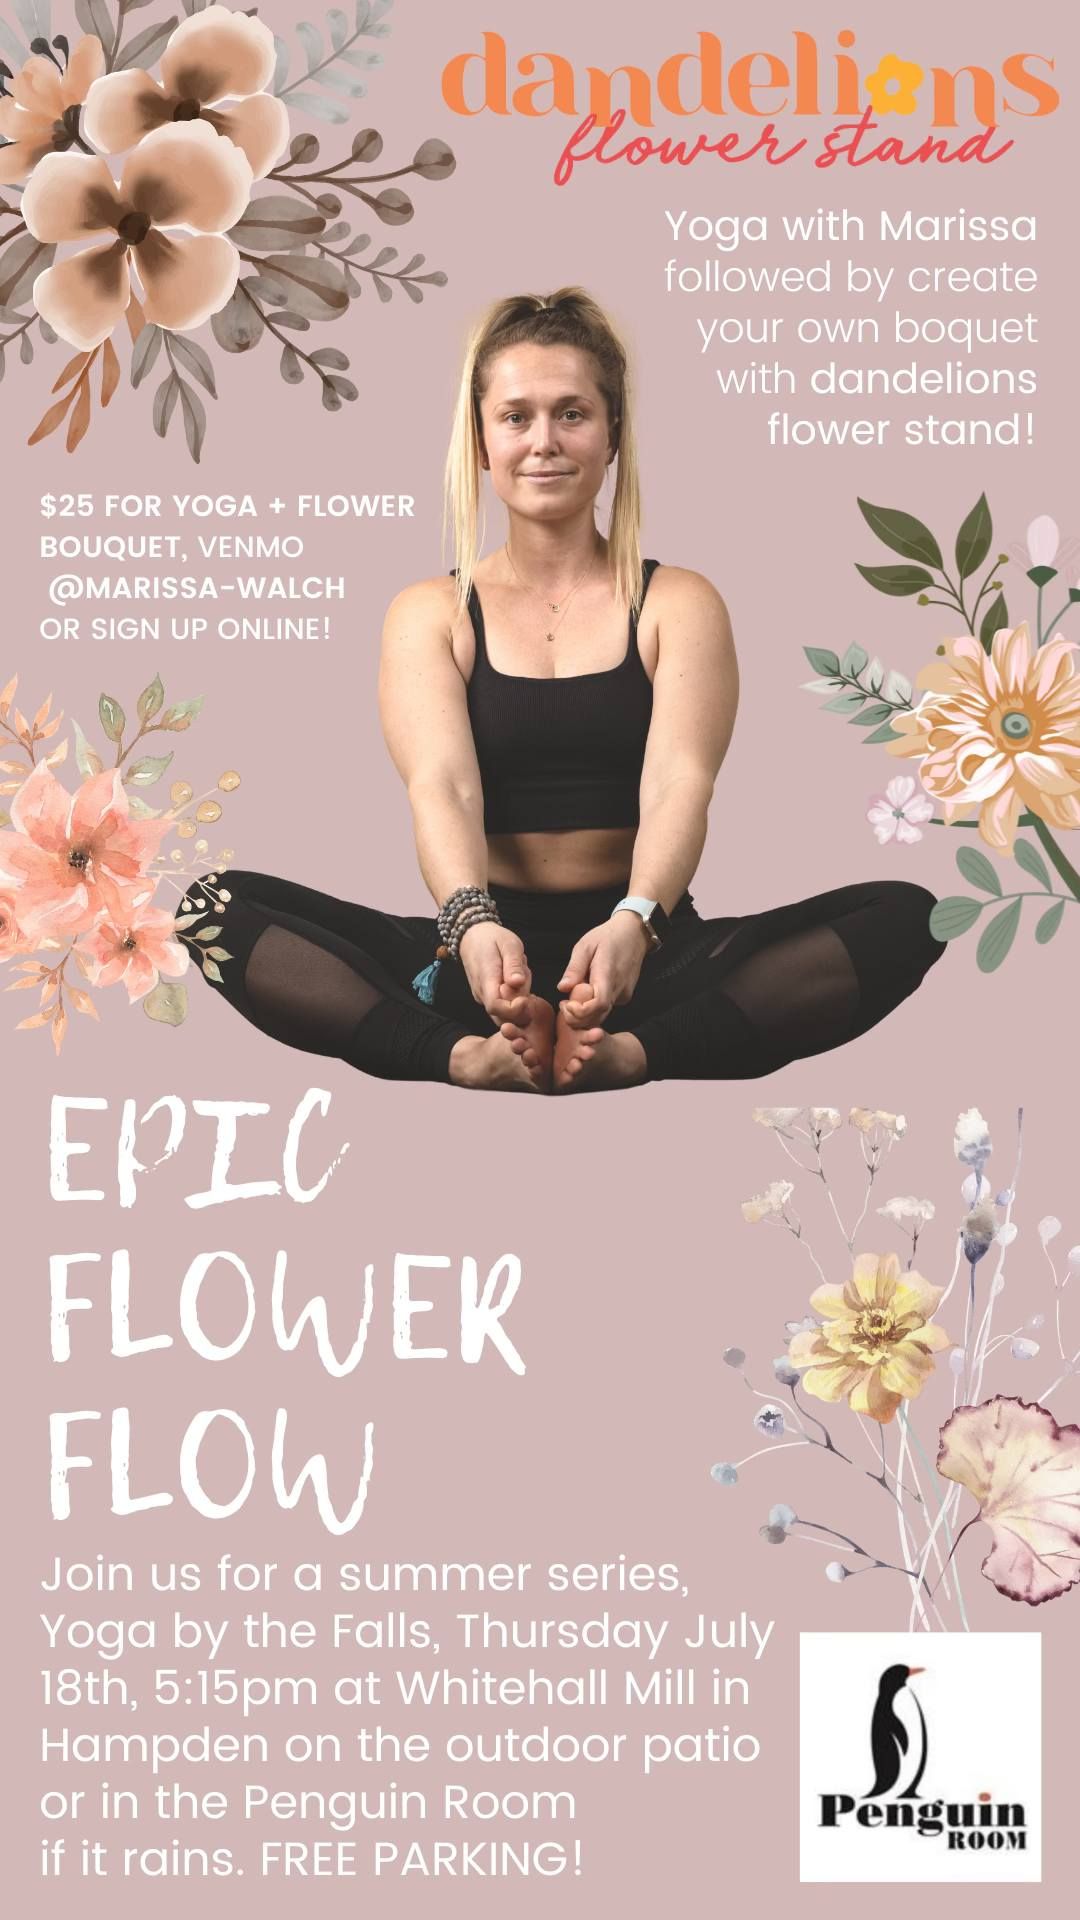 Yoga by the Falls - Epic Flower Flow with Marissa Walch & dandelions flower stand at Whitehall Mill